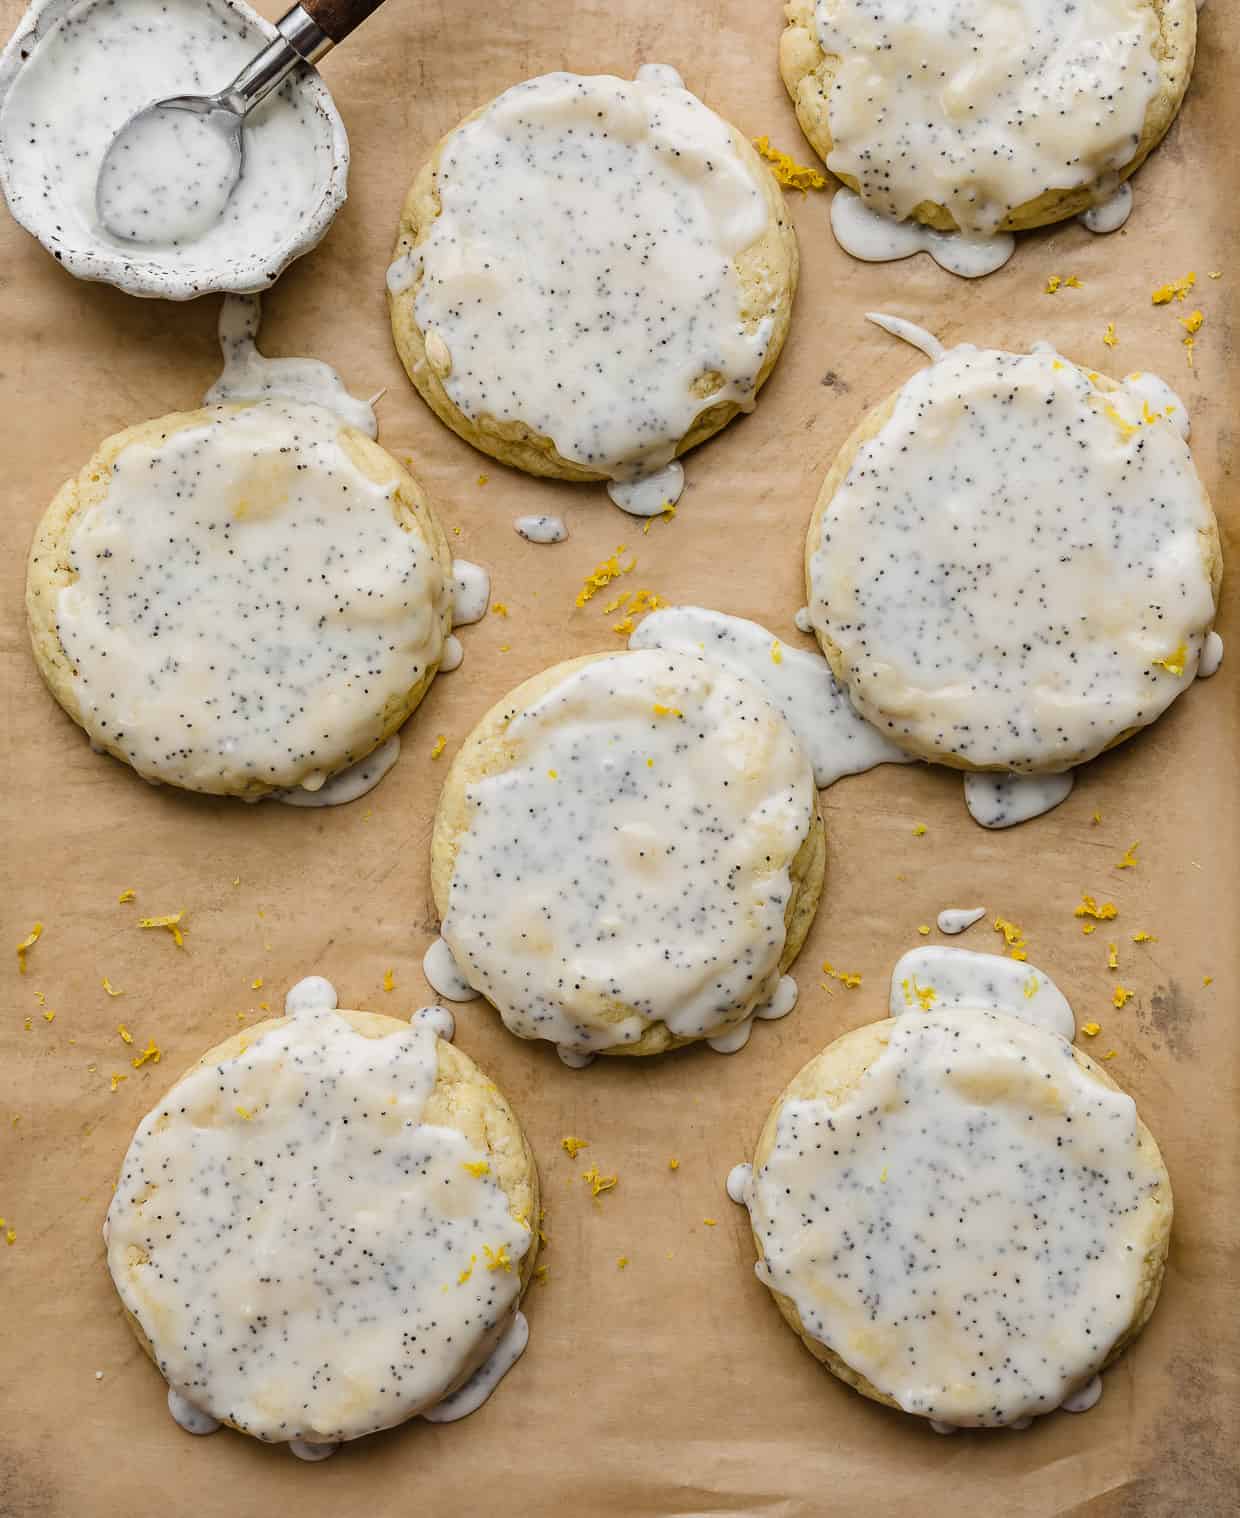 A lemon almond poppy seed glaze overtop of lemon poppy seed cookies that are on a tan colored parchment paper.